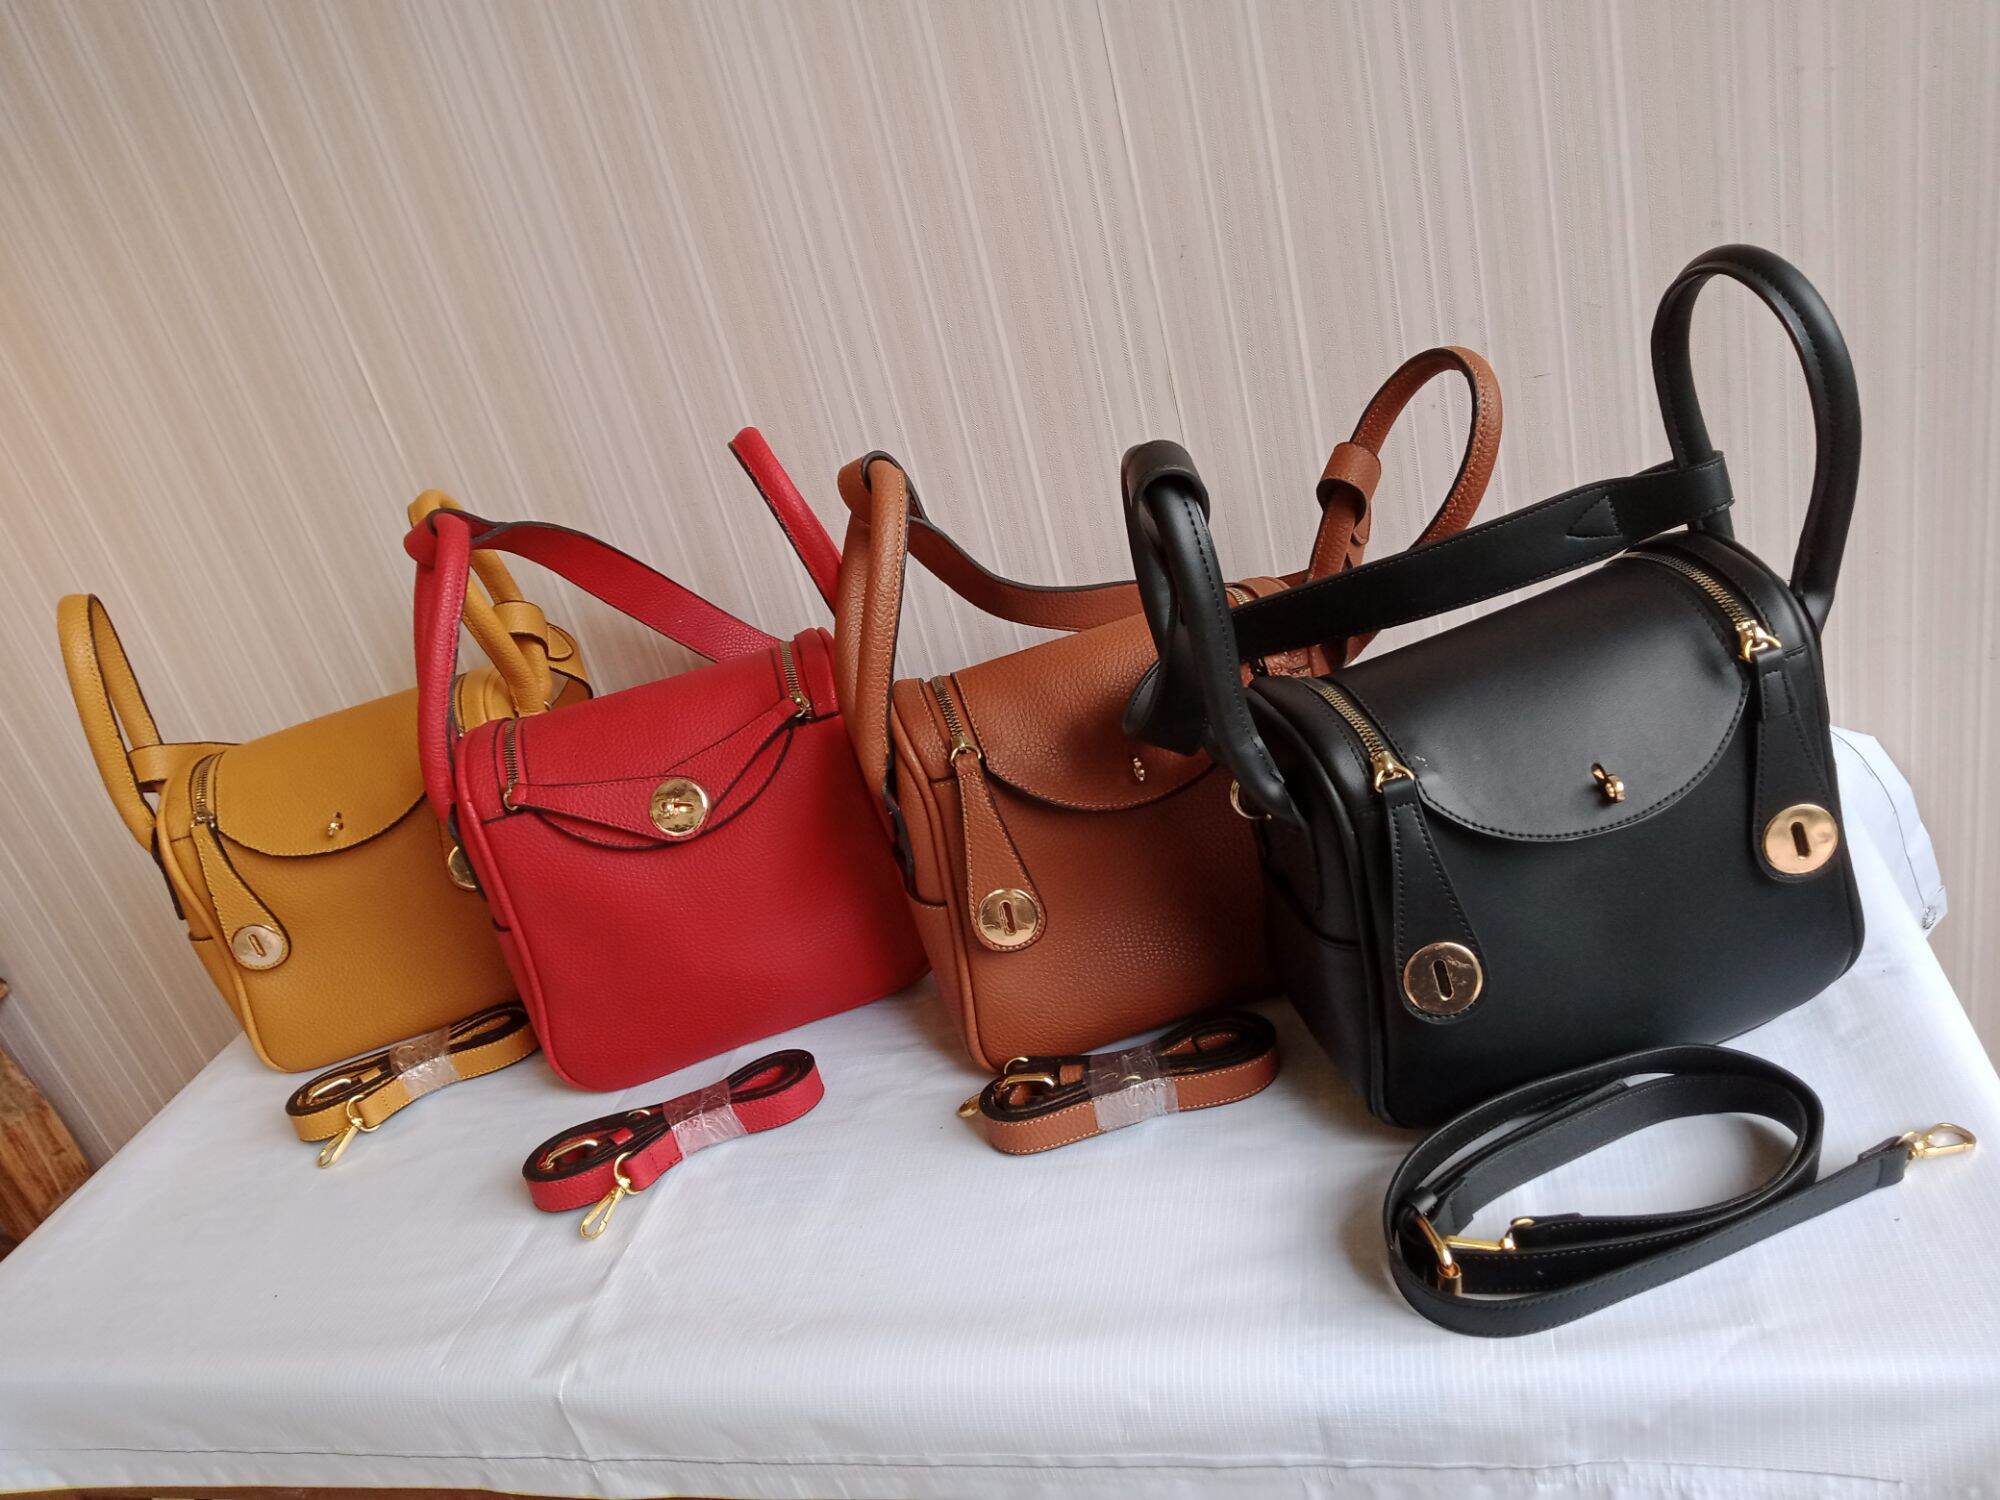  Tas Lindy  available in color red yellow brown black 